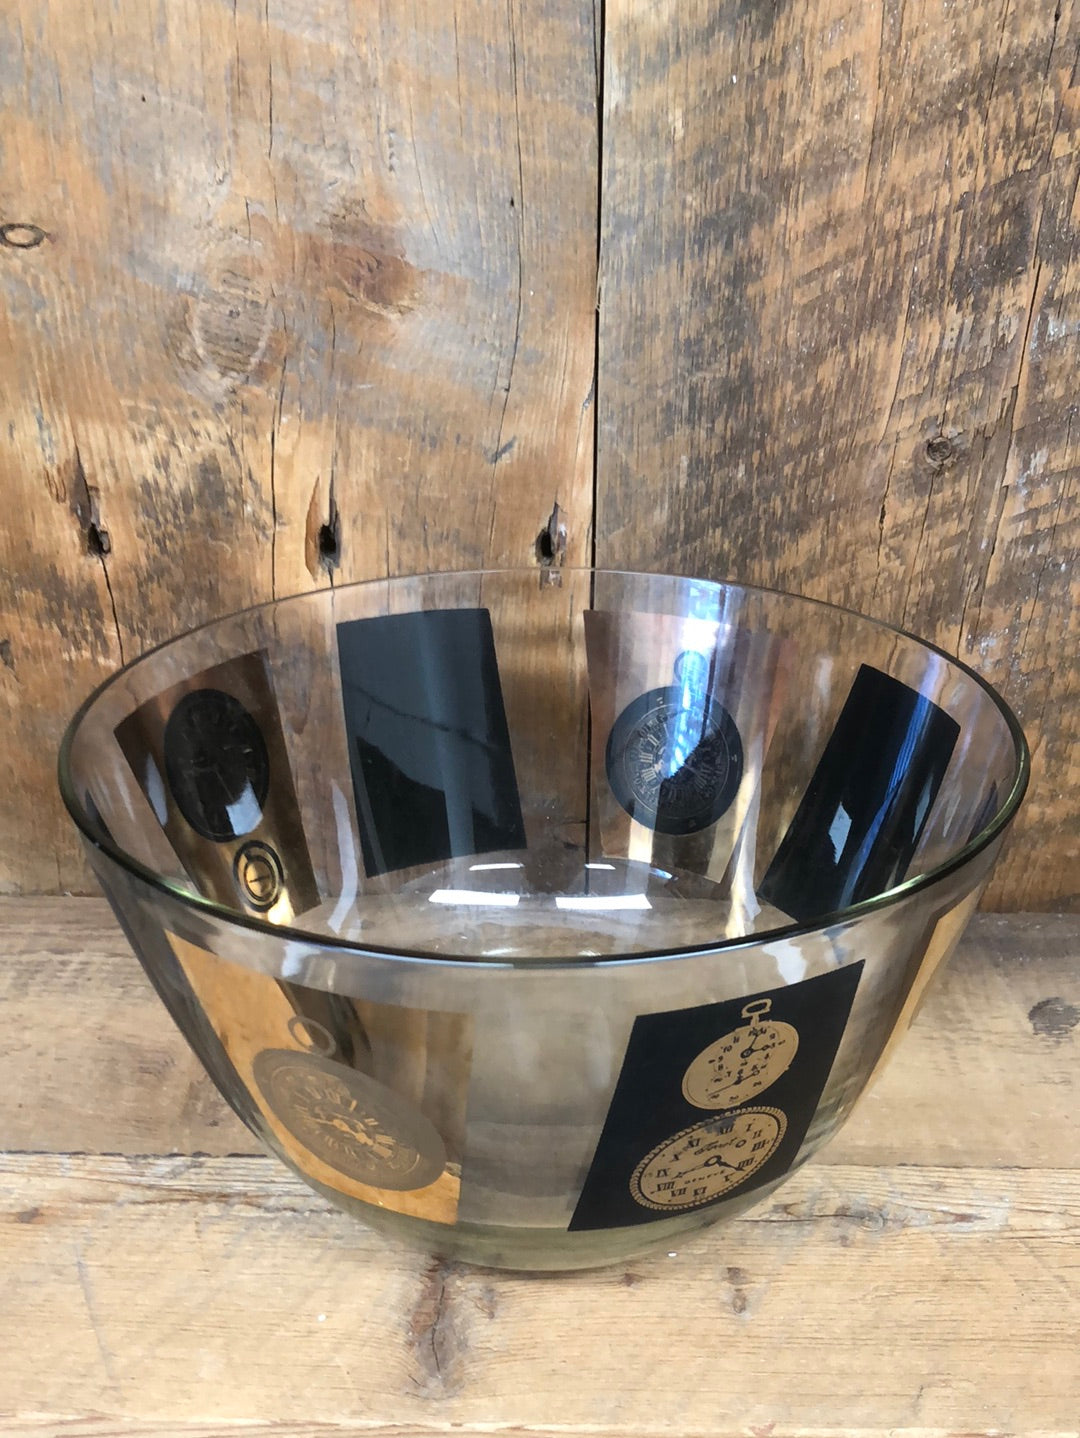 Mid Century Modern Glass Bowl with Black and Gold Clocks